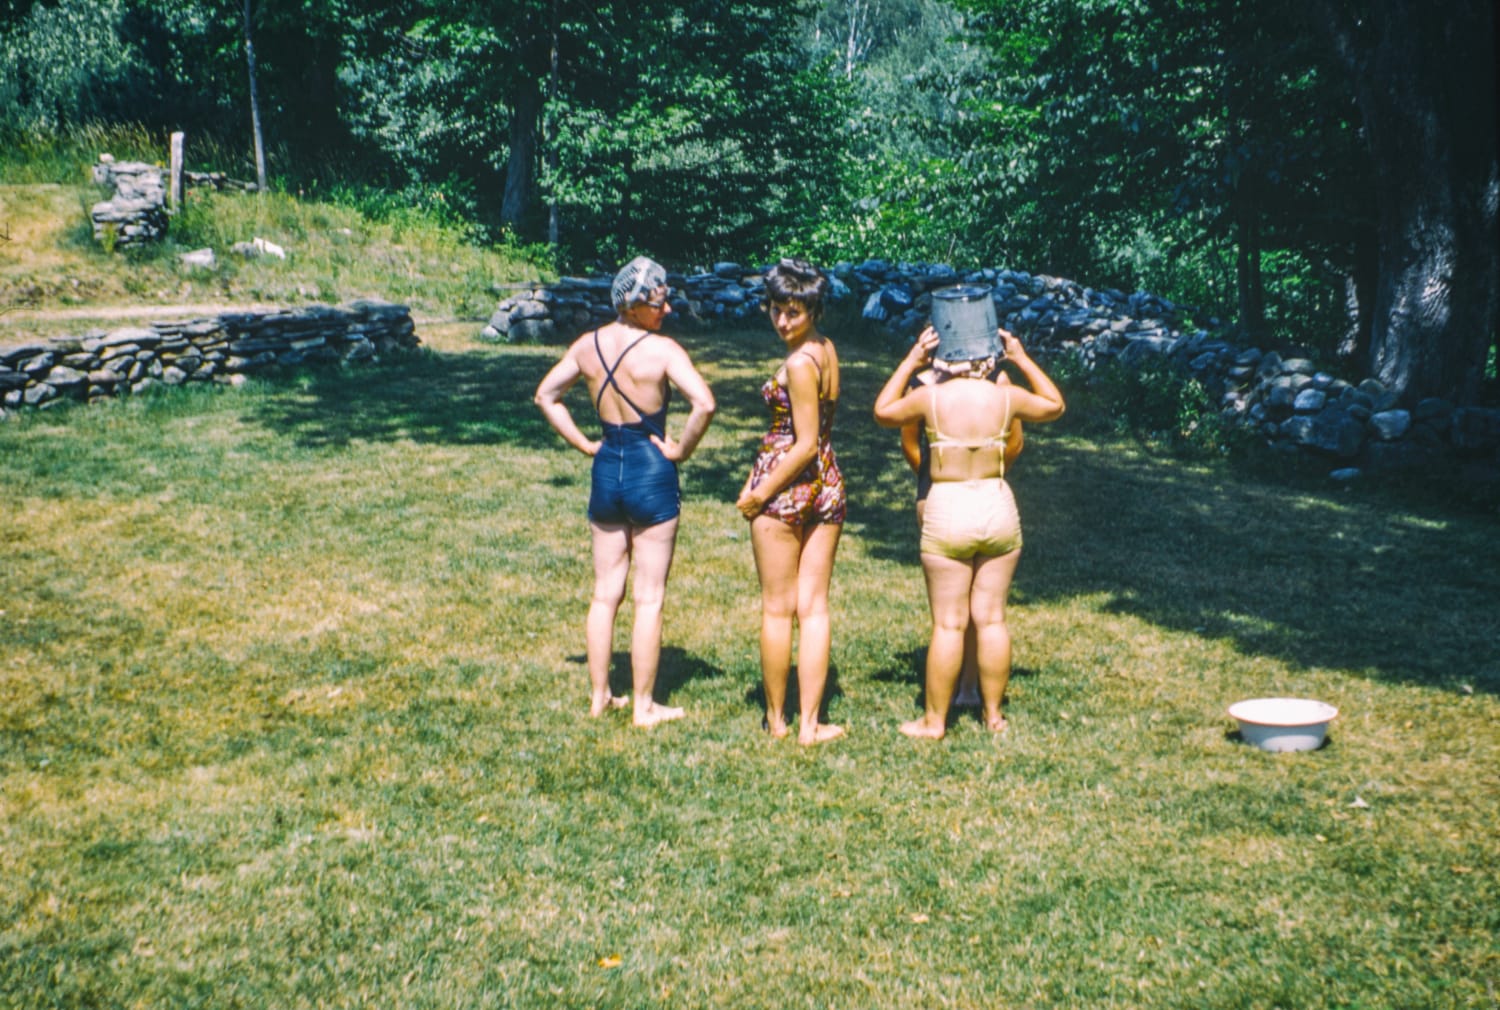 Swim suits, curlers and a bucket on the head. September 1963. A found Kodachrome slide from Thomas Hawk